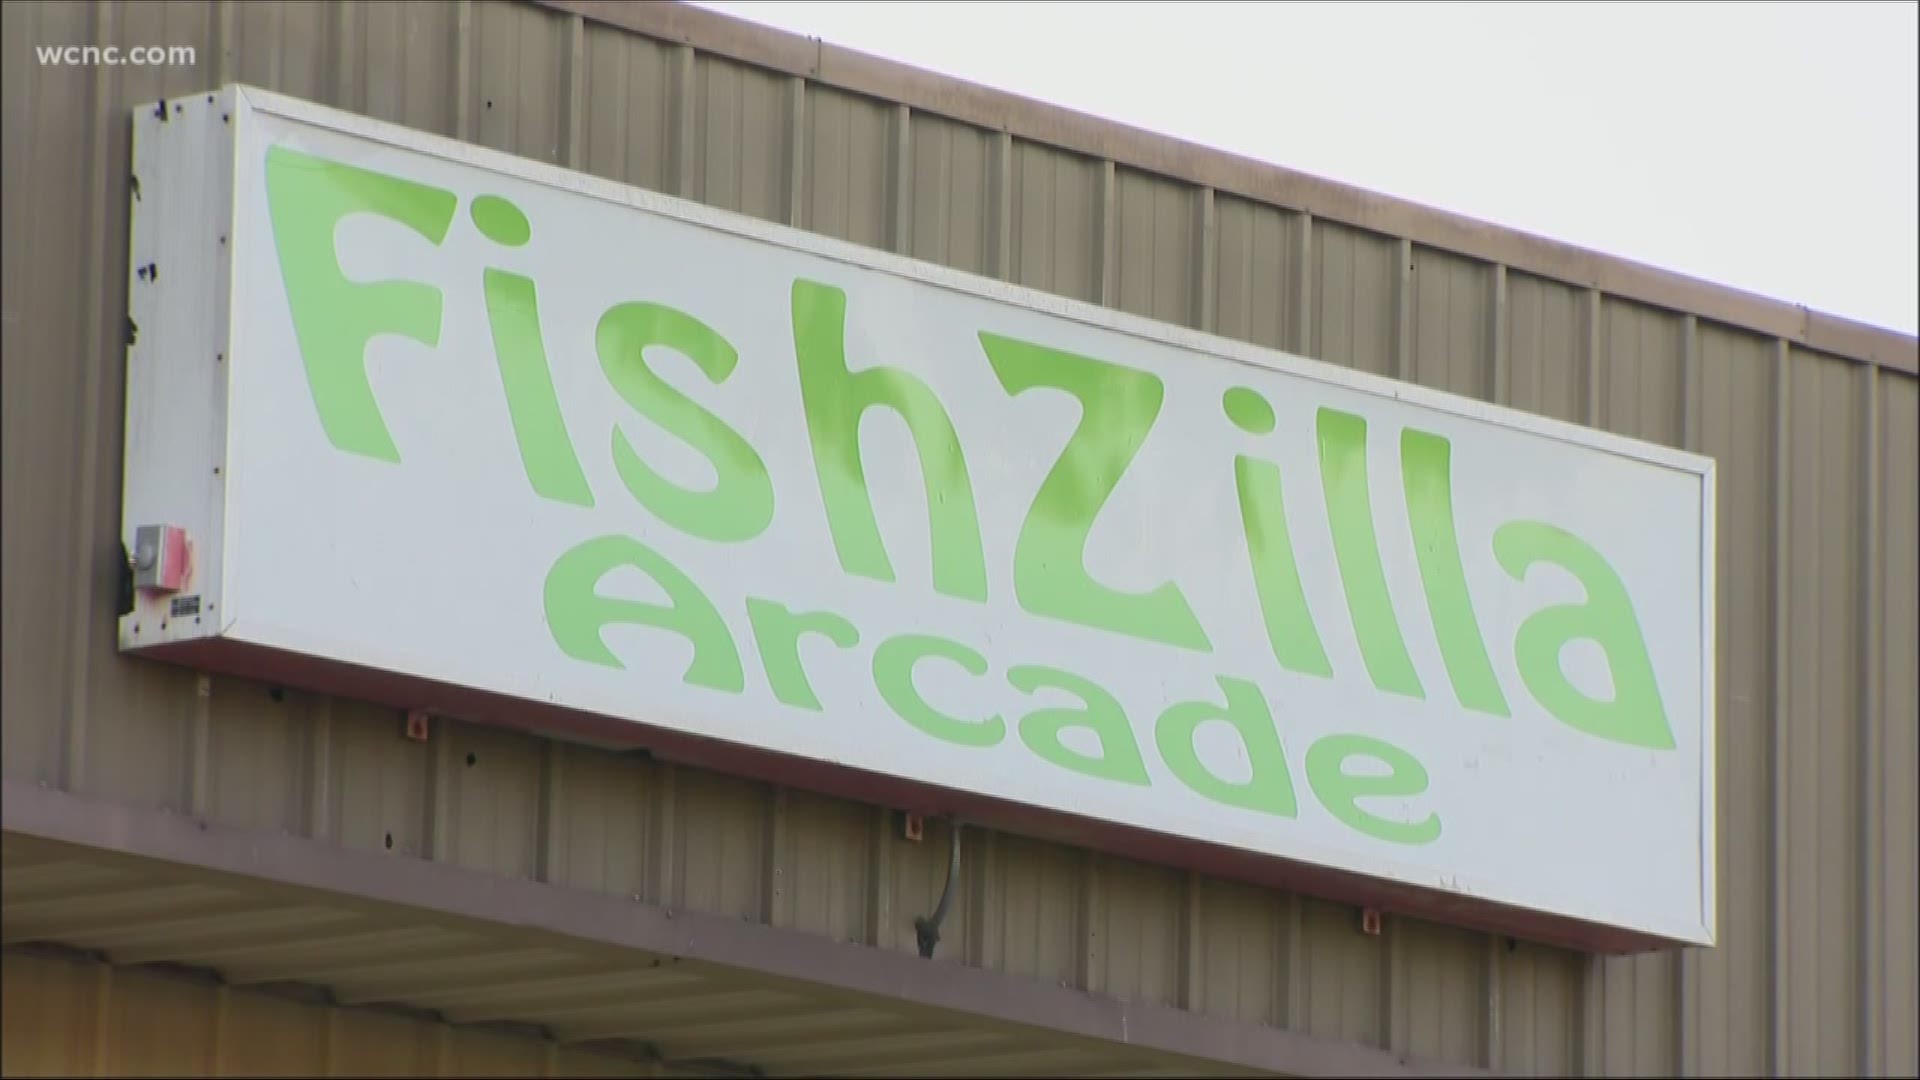 According to police, the shooting happened around 1:15 a.m. on the 1800 block of east Innes Street at the Fishzilla Arcade. 